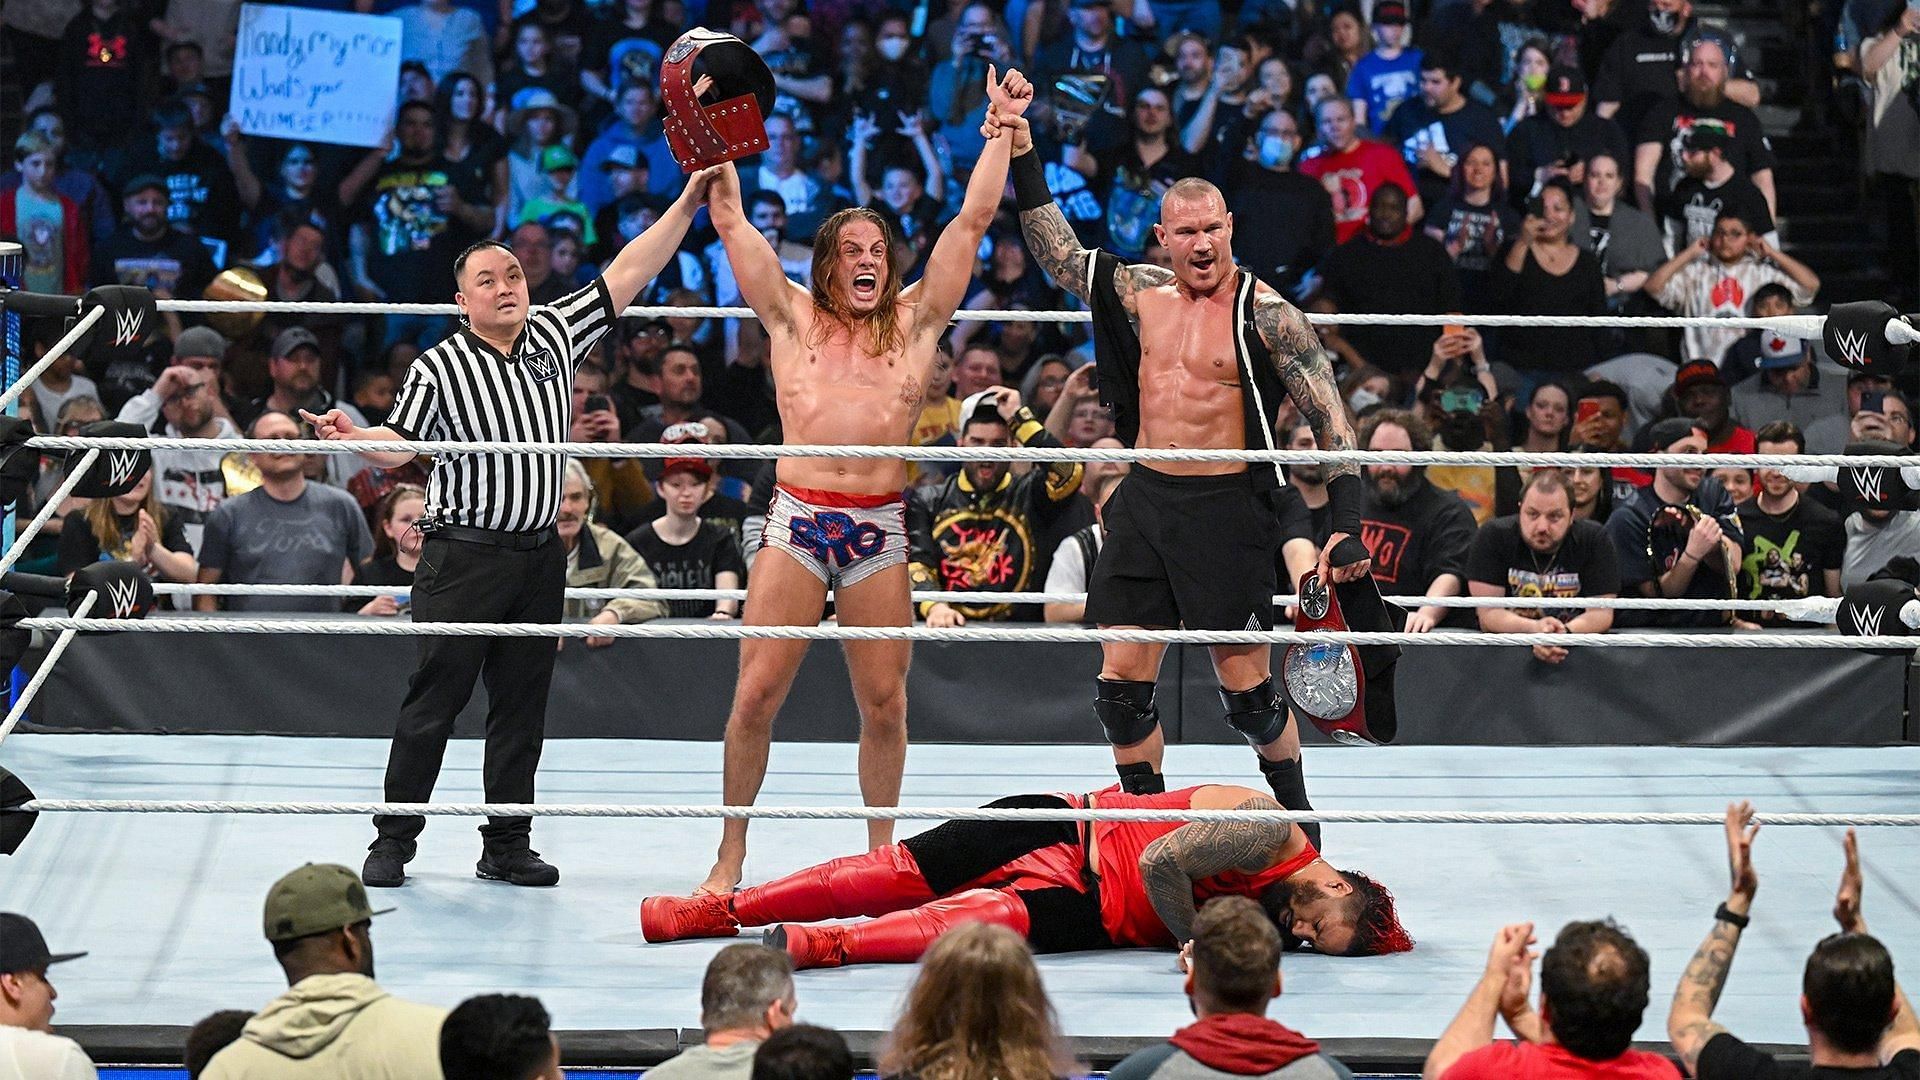 Riddle picked up a statement victory on WWE SmackDown.